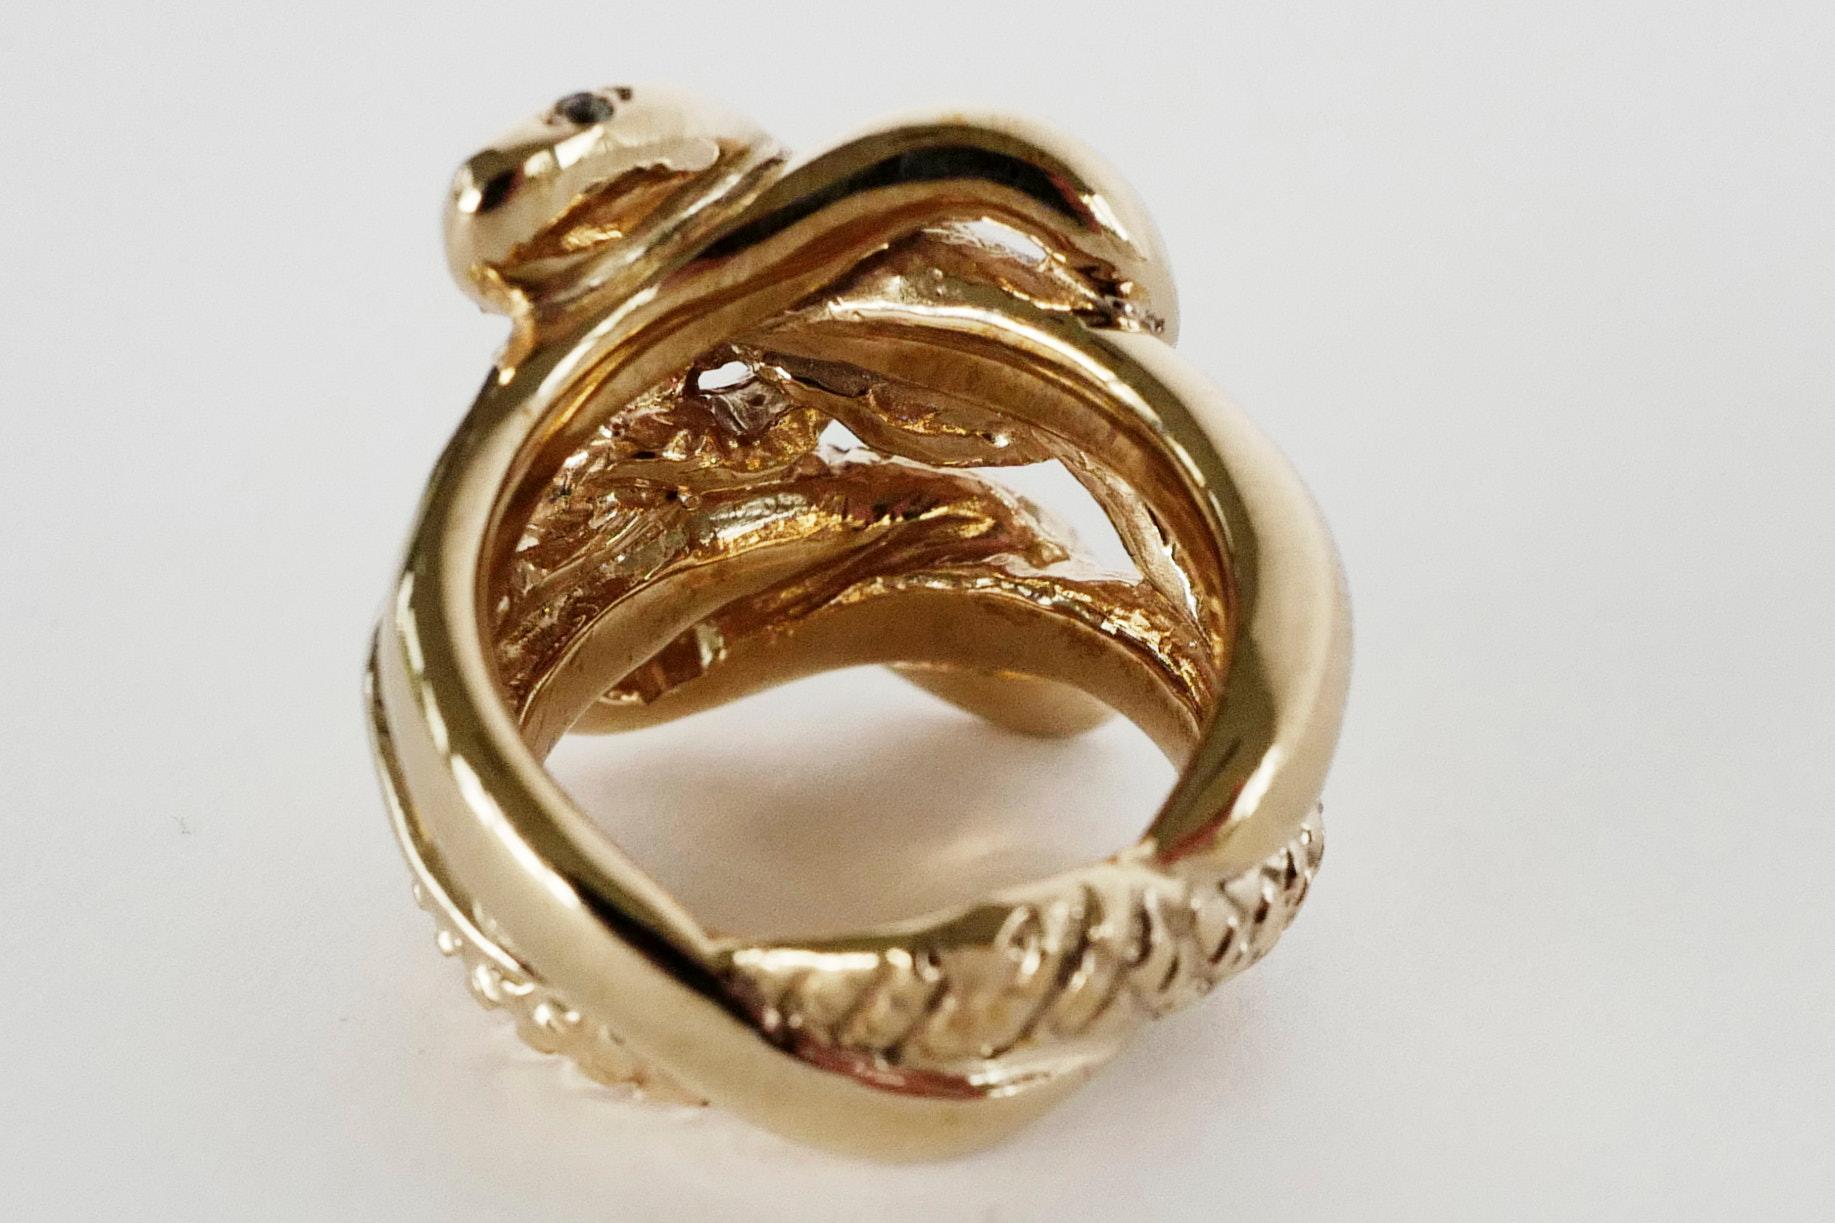 Snake Ring Gold Vermeil Emerald White Diamond Ruby Victorian Style J Dauphin For Sale 4